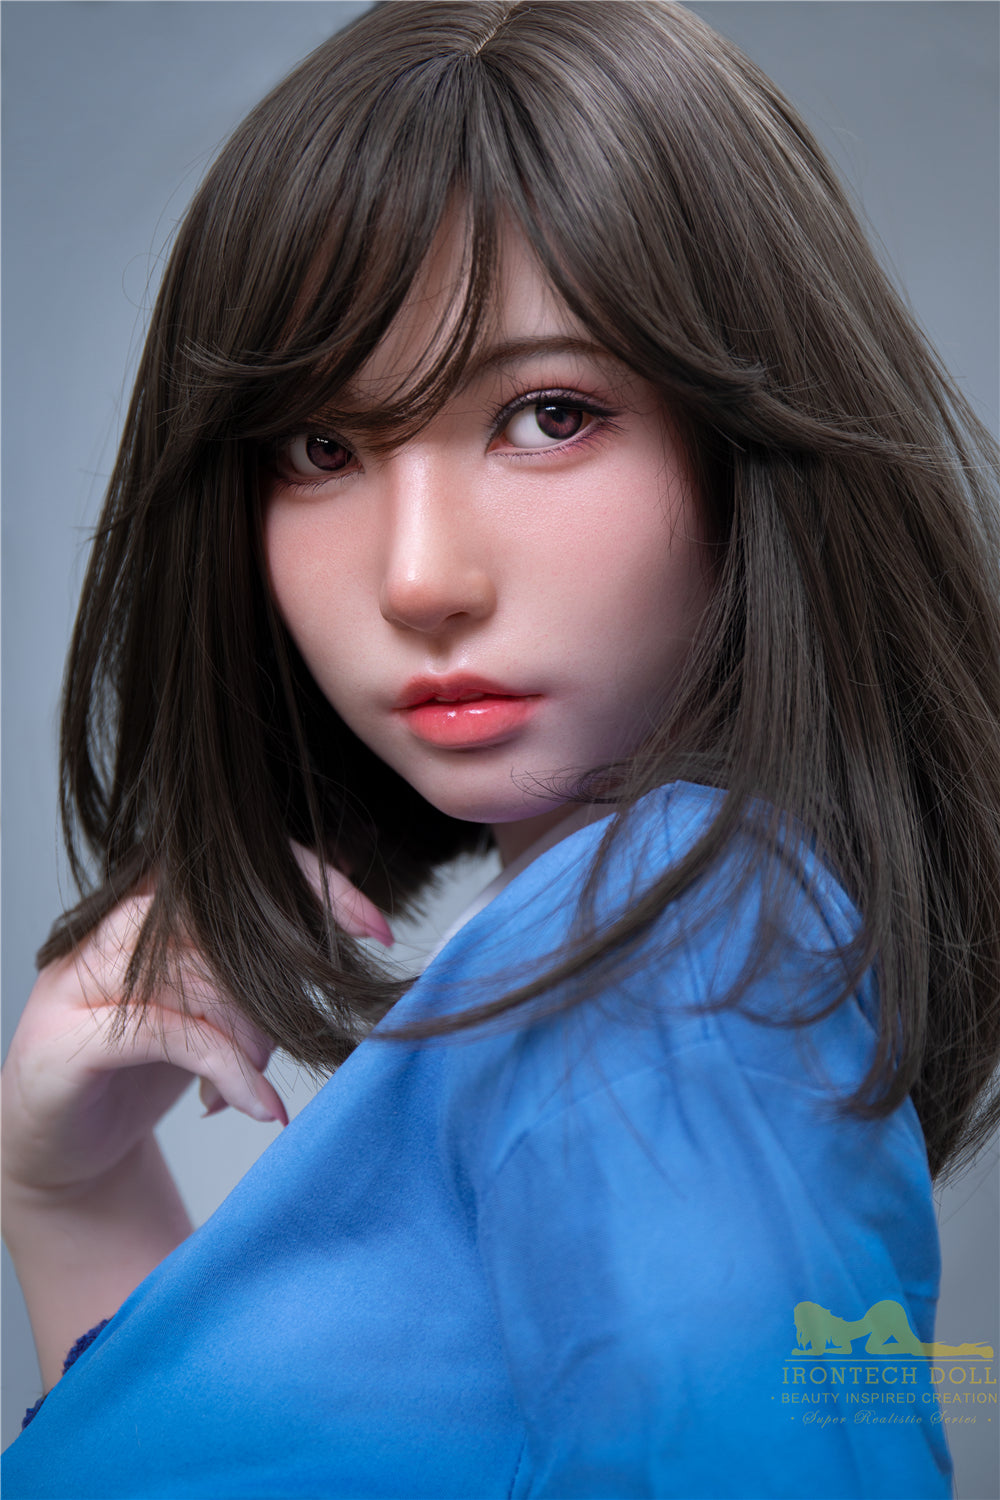 Irontech Doll 164 cm G Silicone - Suki | Buy Sex Dolls at DOLLS ACTUALLY